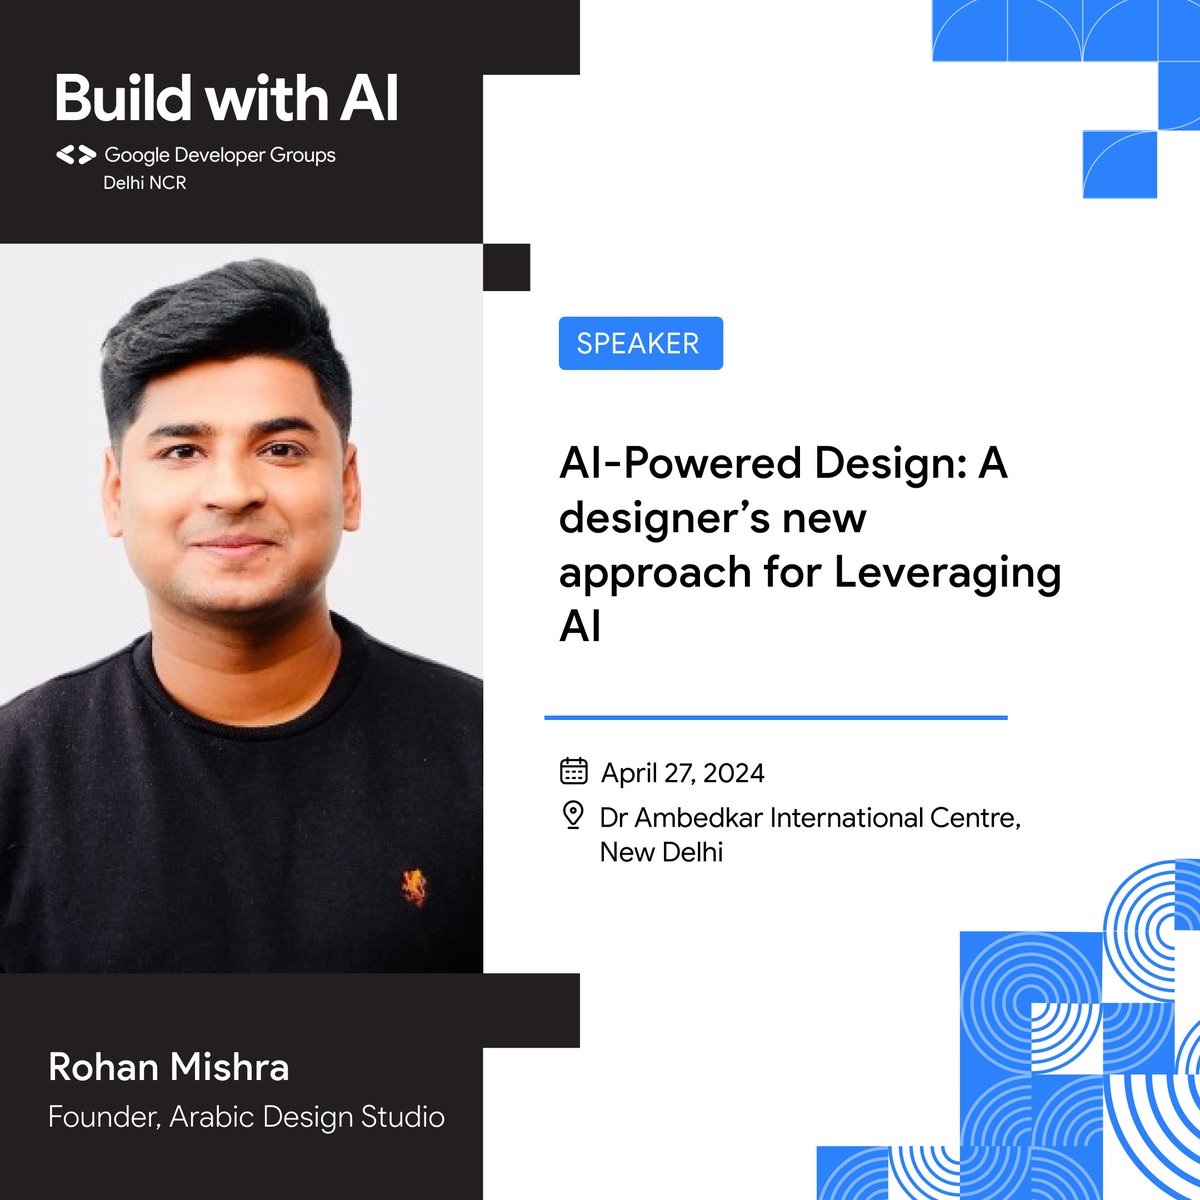 Designers, amplify creativity! 🎨✨ Rohan's unlocking 'AI-Powered Design' - using AI as a co-pilot to generate visuals, suggest aesthetics & explore uncharted artistic realms! Copy